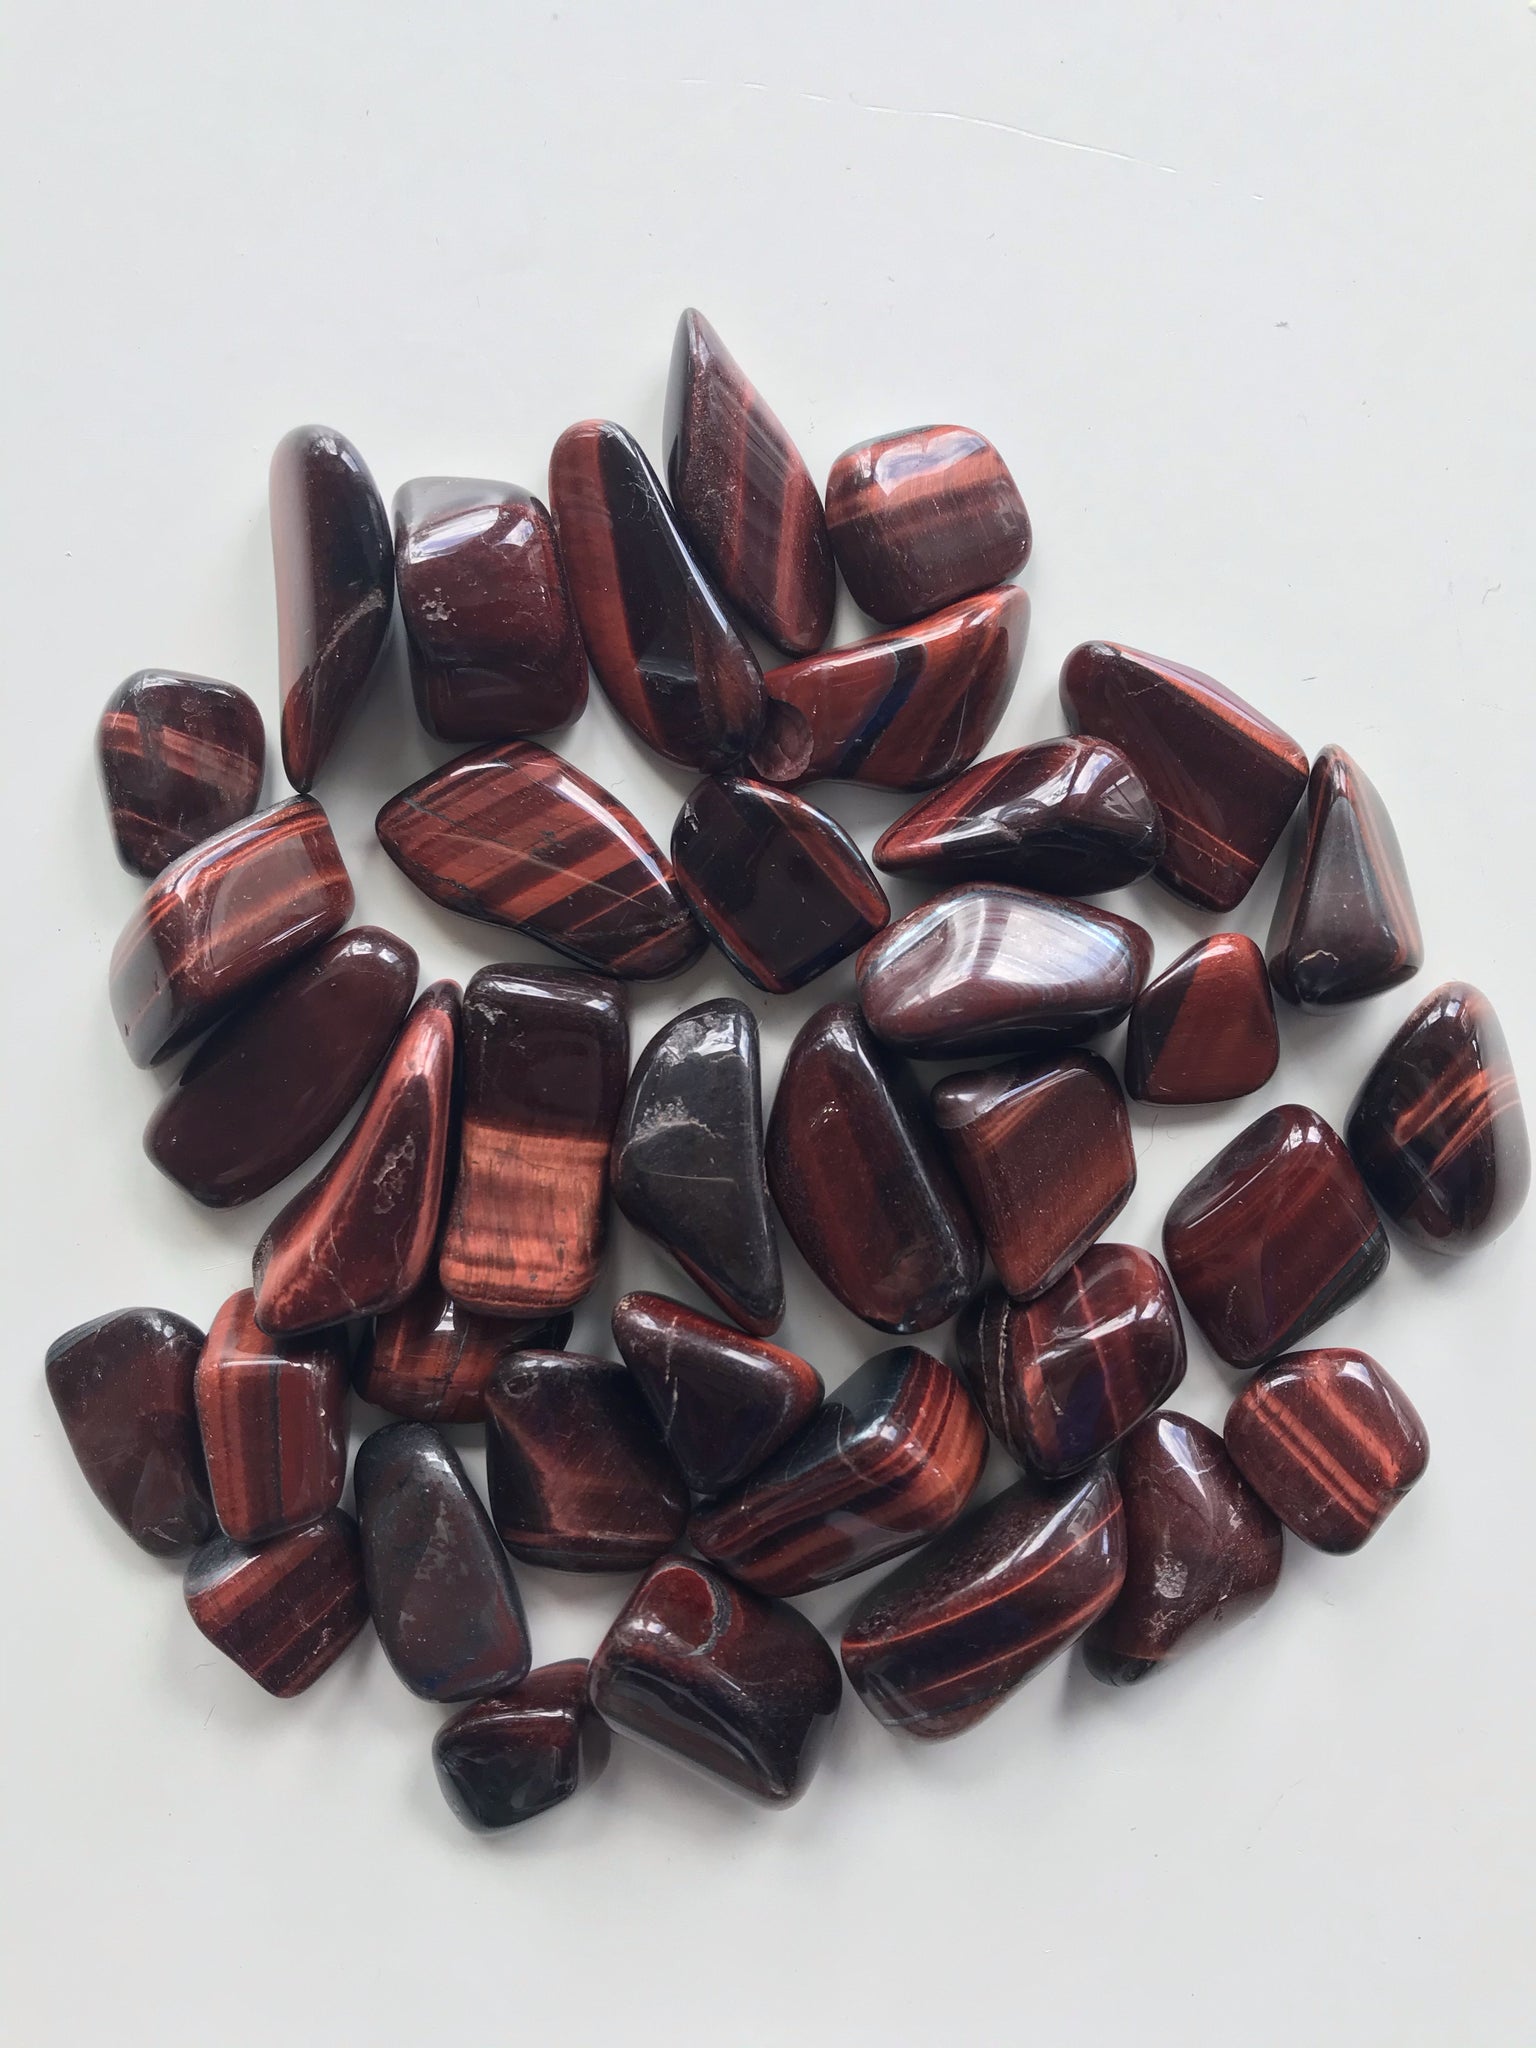 Red Tiger Eye Tumbled - Divine Clarity